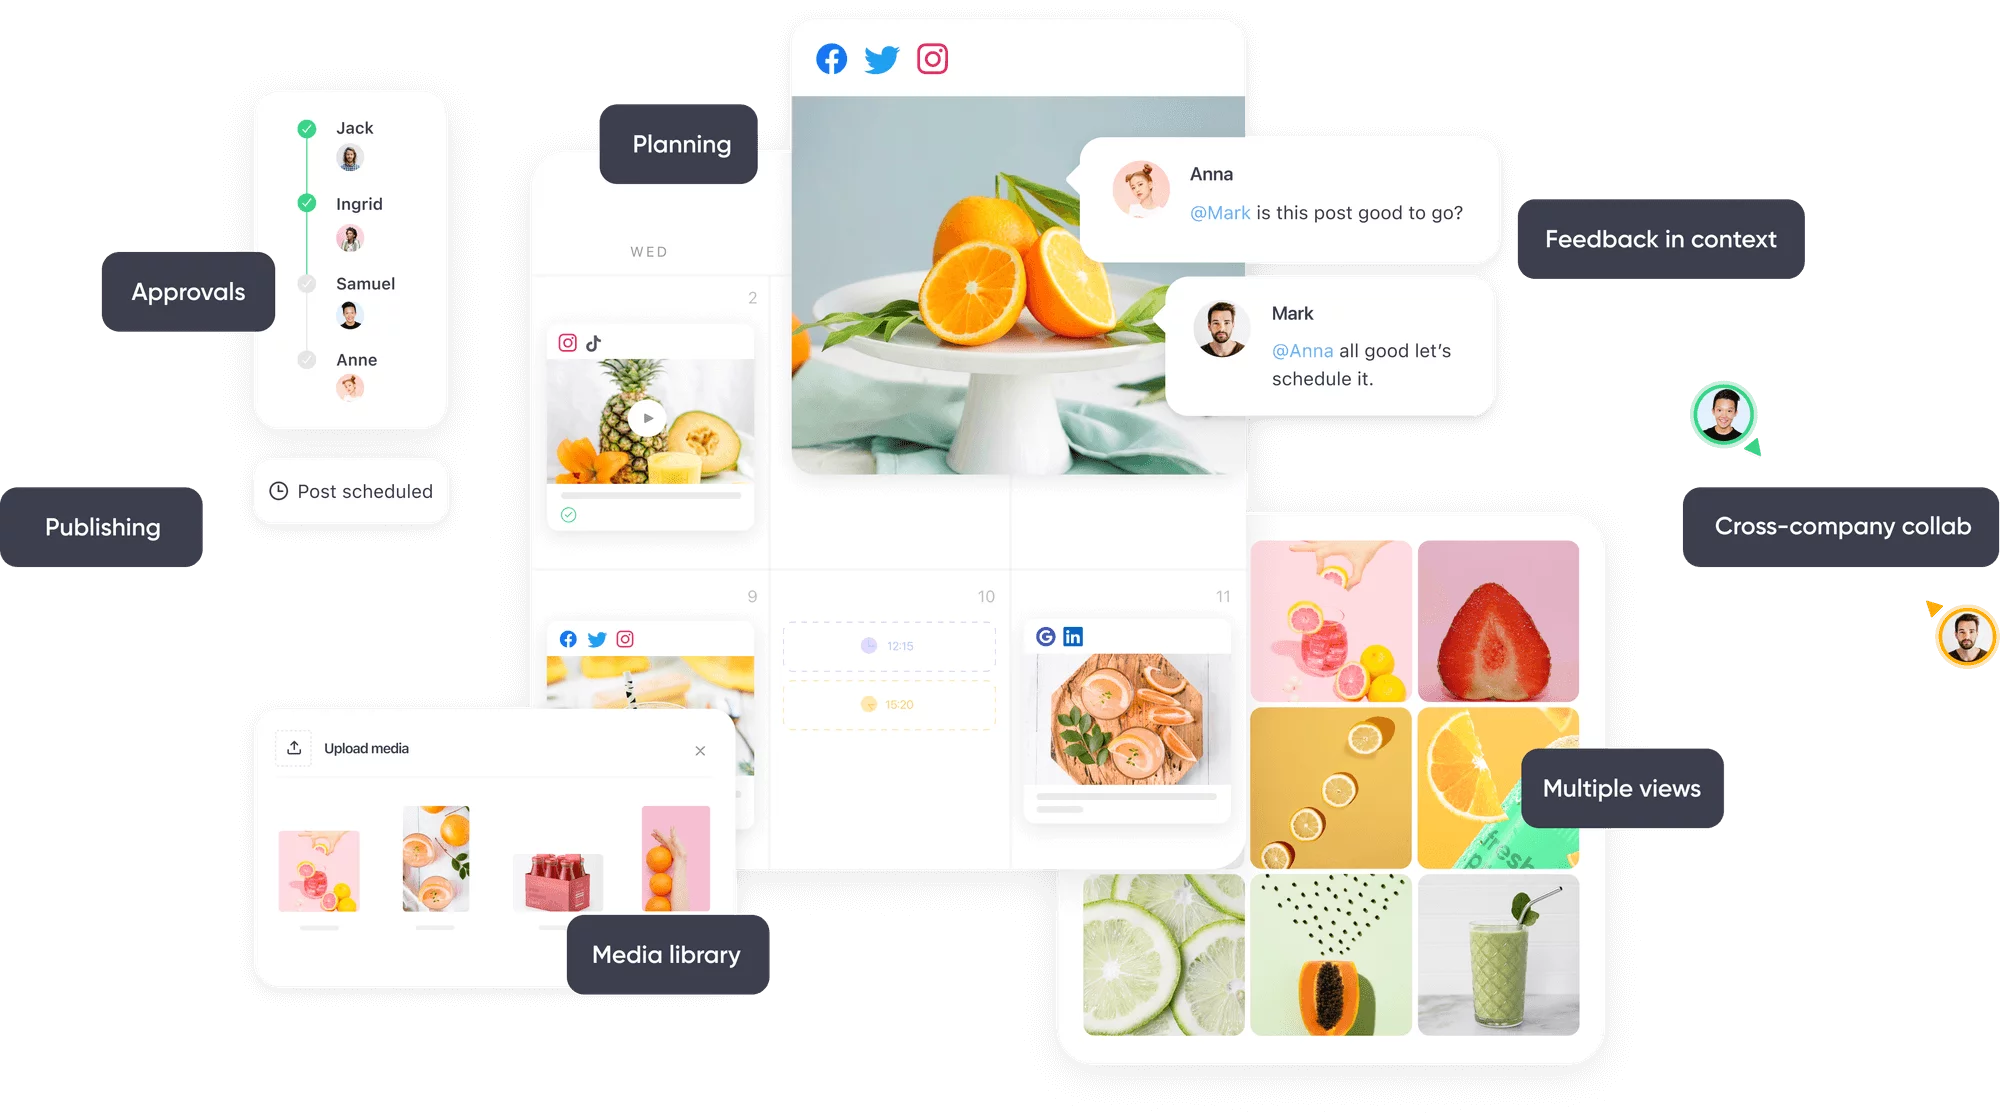 Planable's social media planning and collaboration interface with features like approvals, publishing, feedback, media library, and cross-company collaboration.